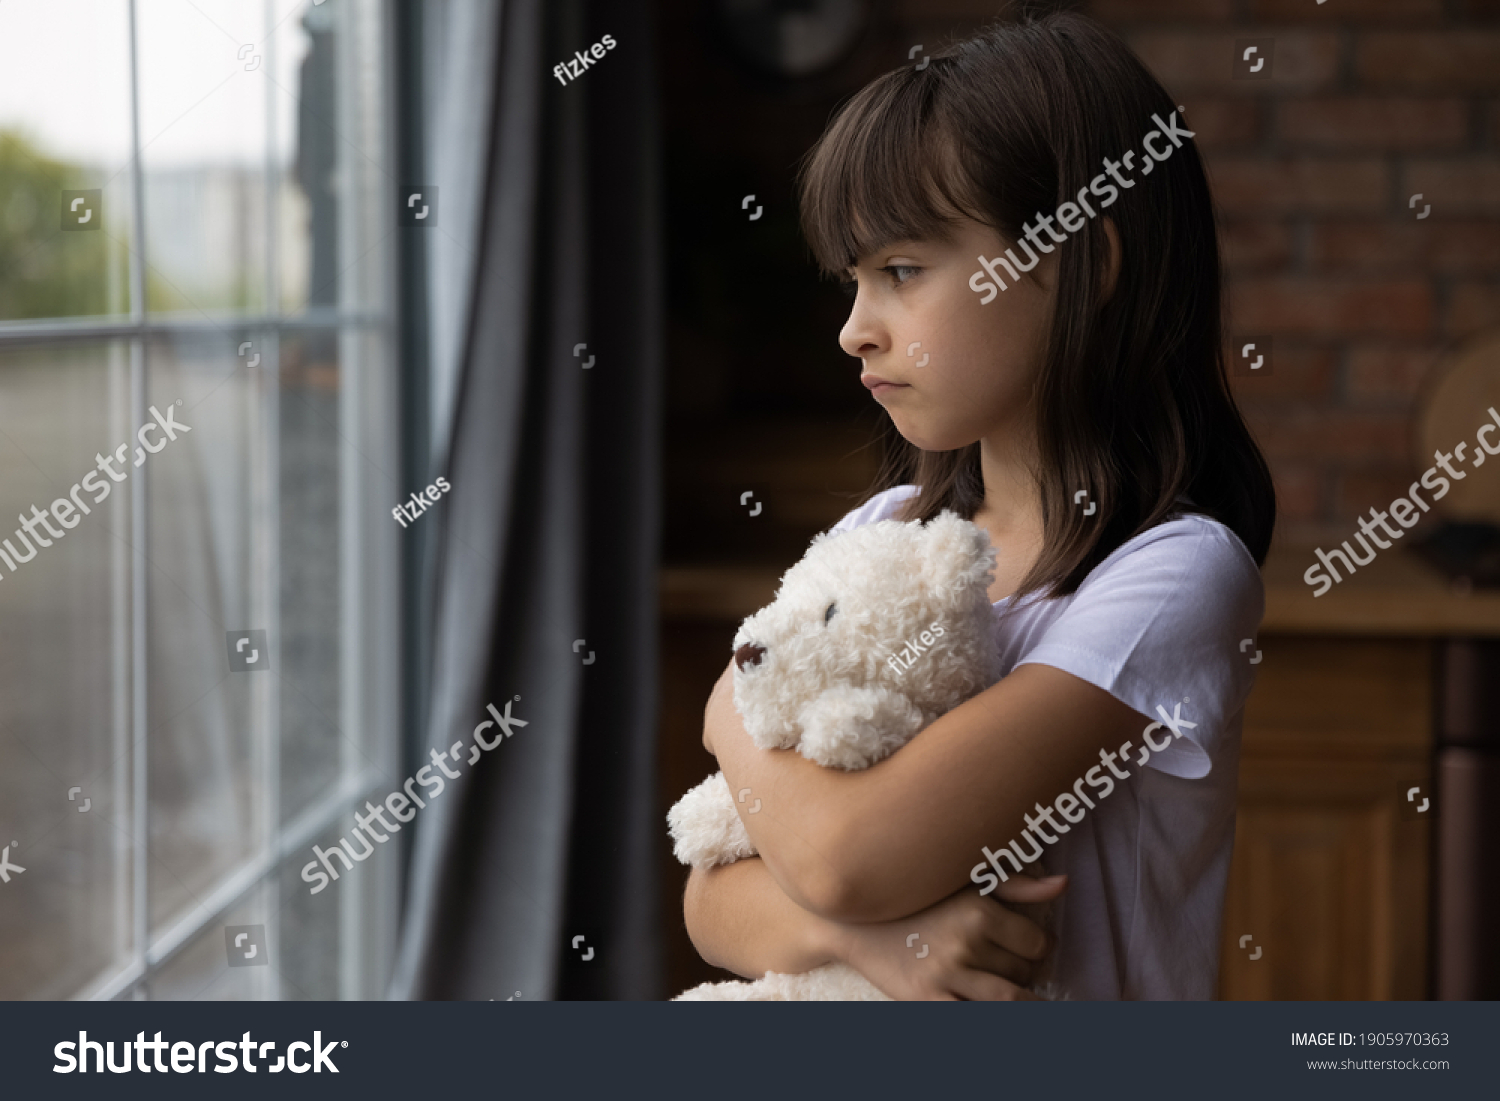 Close up lonely little girl hugging toy, looking out window, standing at home alone, upset unhappy child waiting for parents, thinking about problems, bad relationship in family, psychological trauma #1905970363